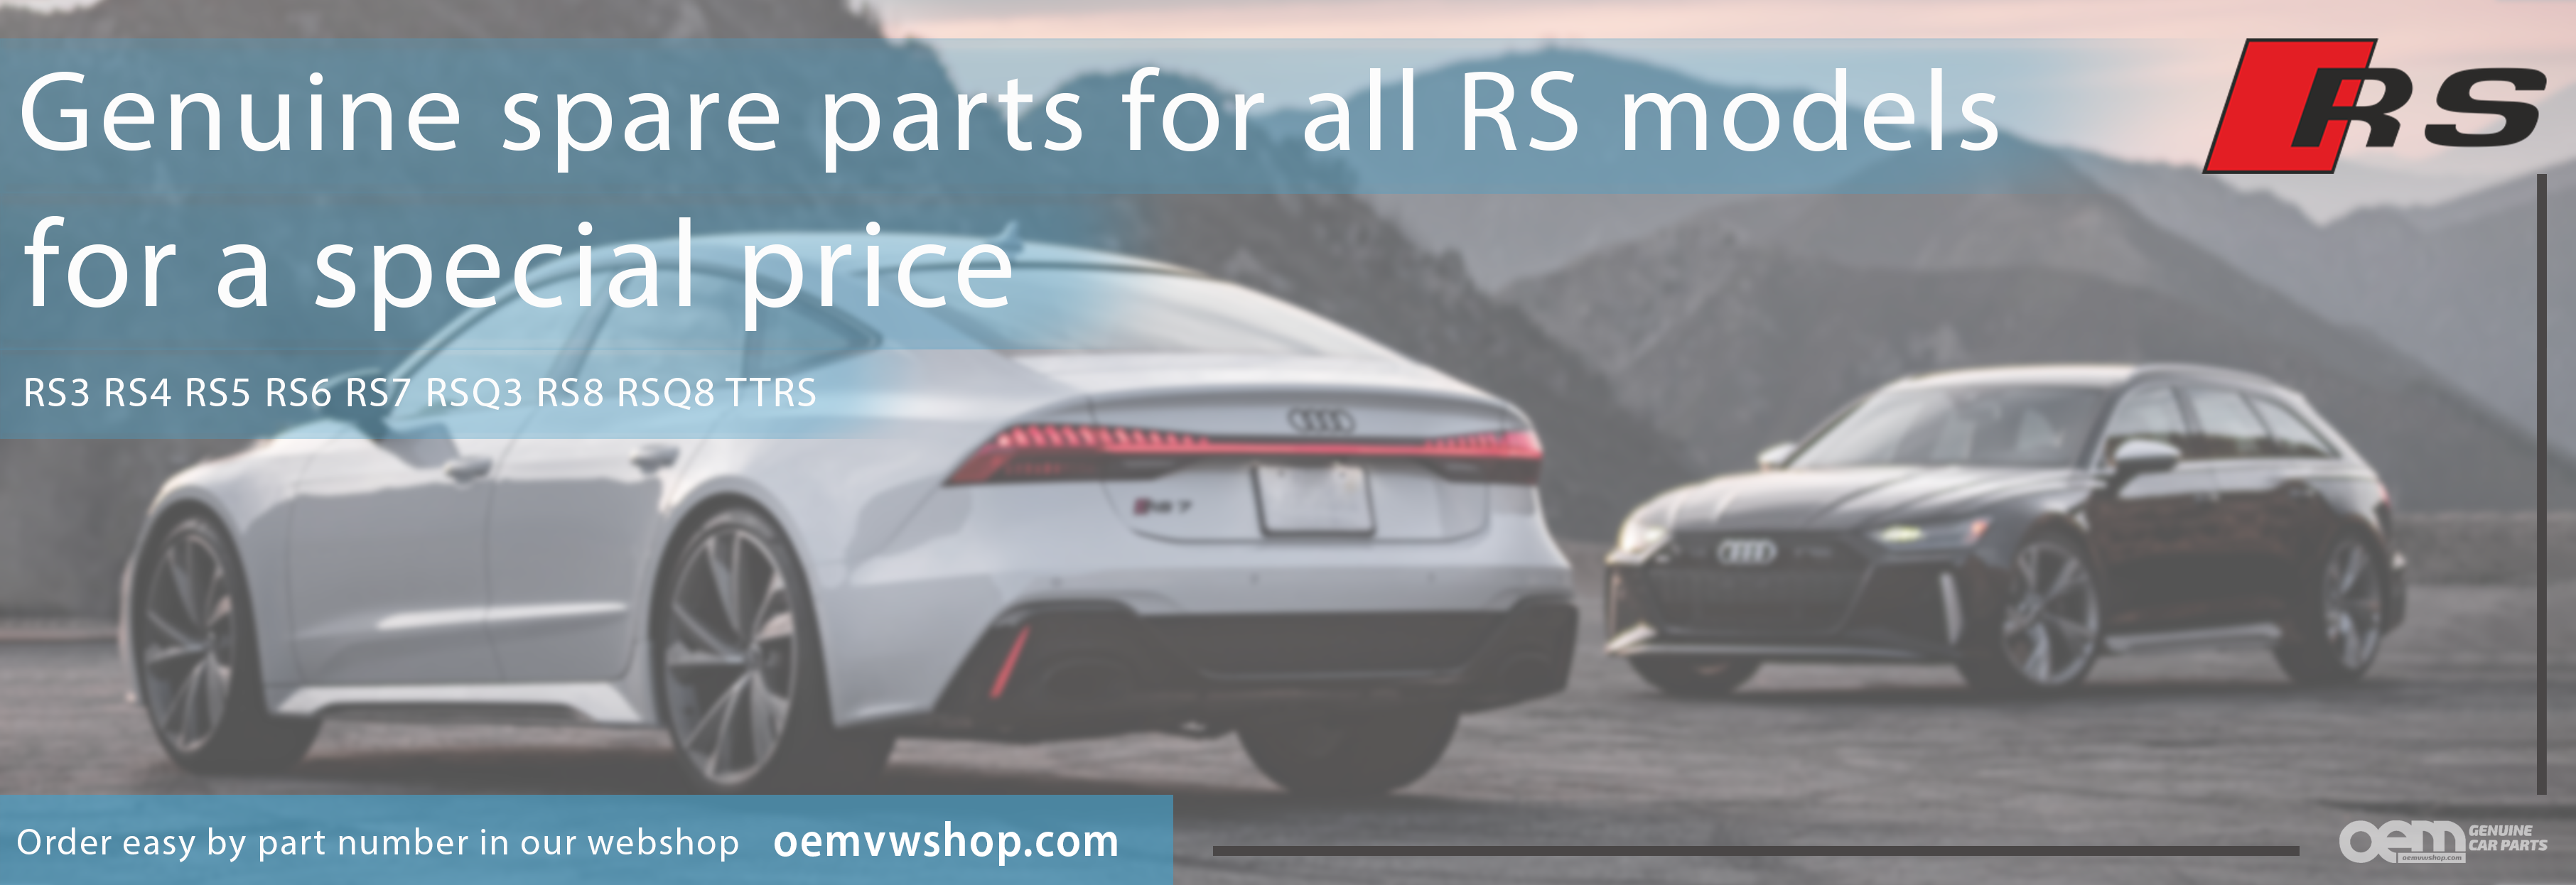 Sale for RS models